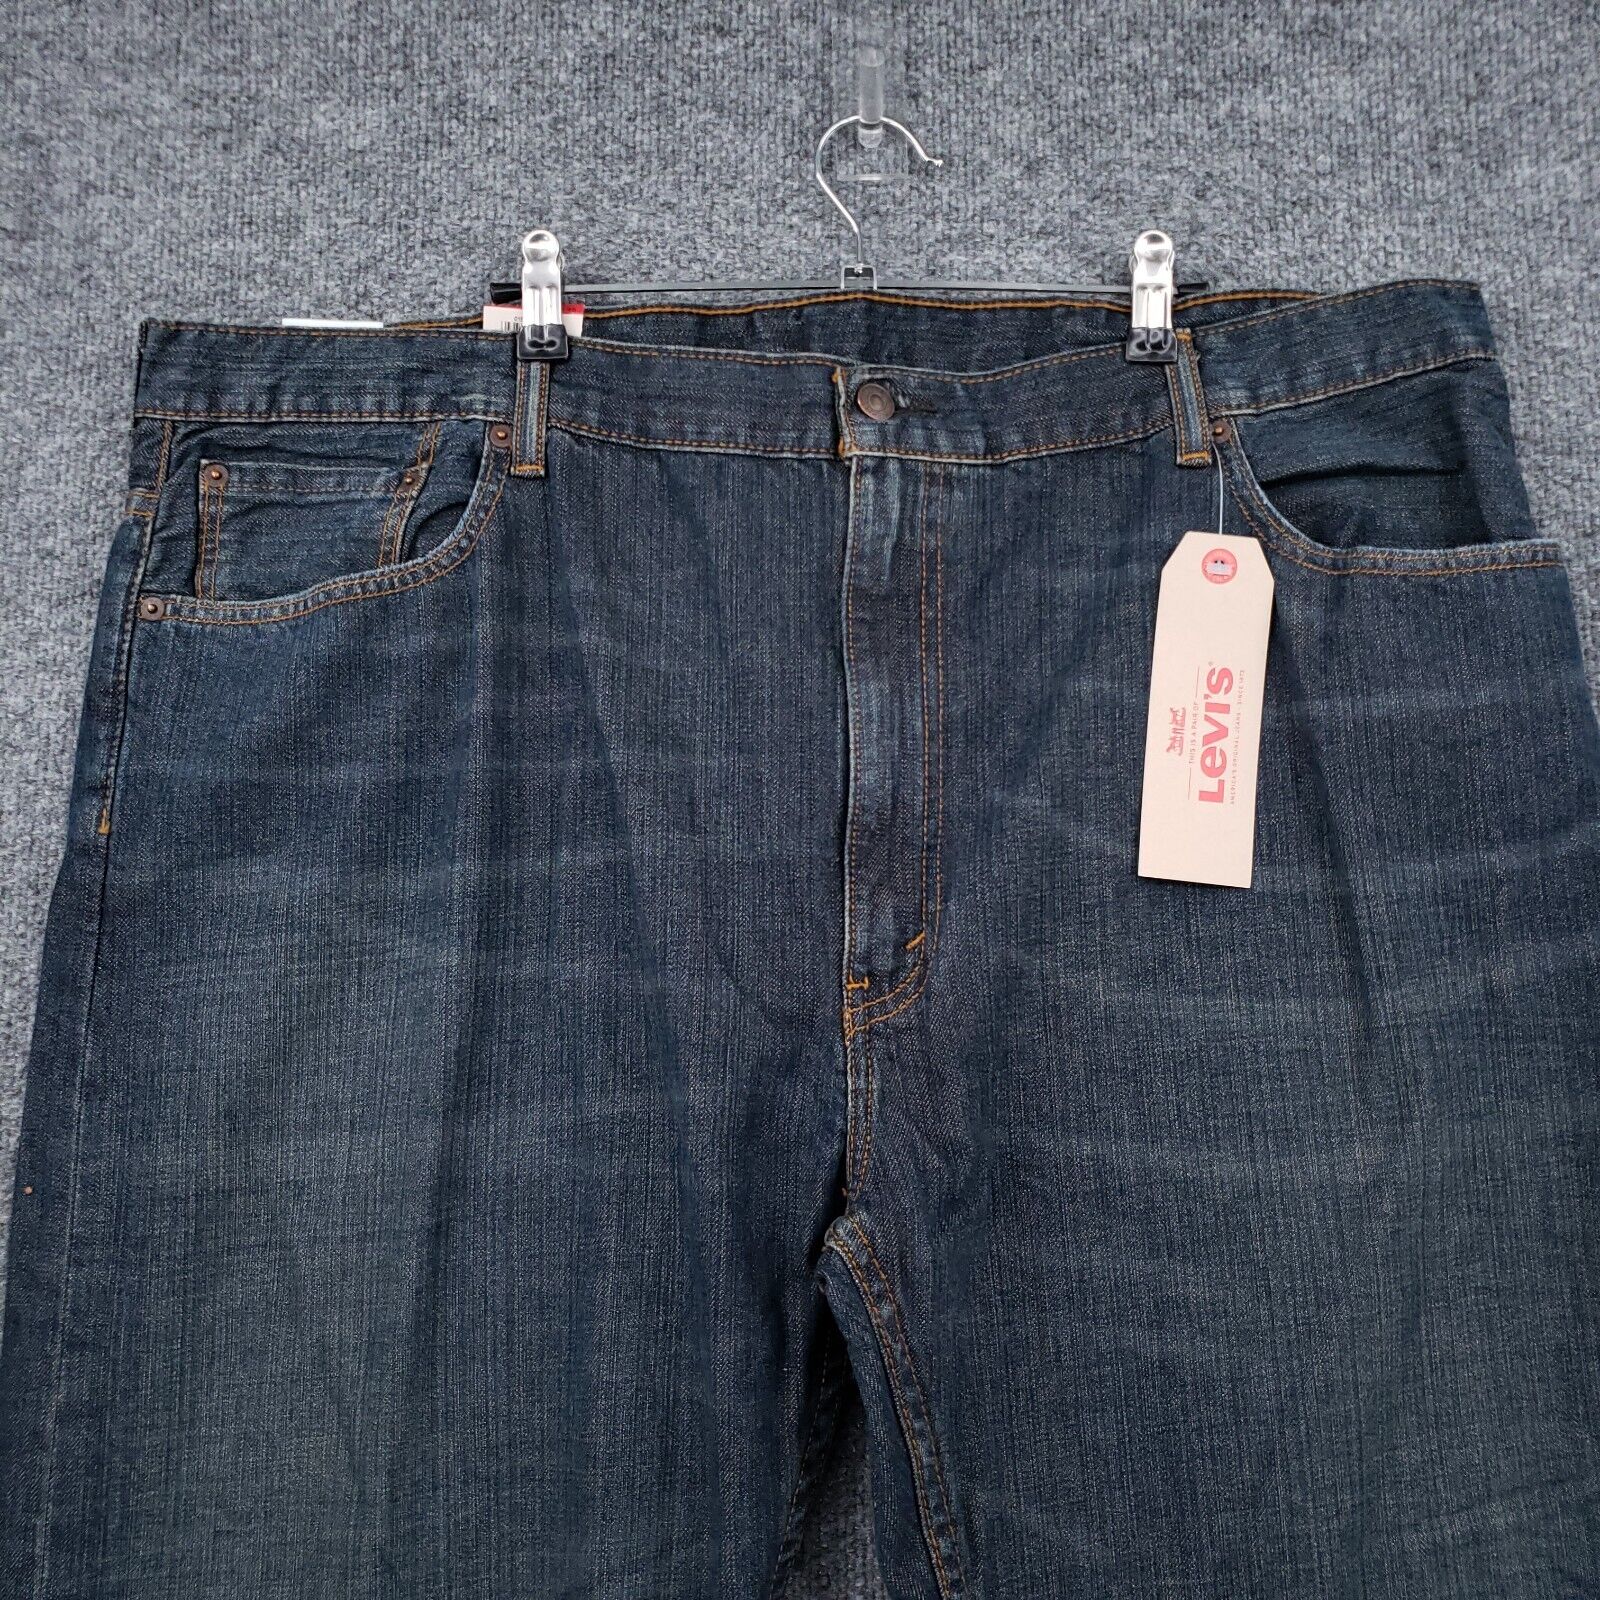 Levi's 559 Jeans Mens 44x30 Big & Tall Mid-Rise Relaxed Straight Blue Denim  NEW | eBay